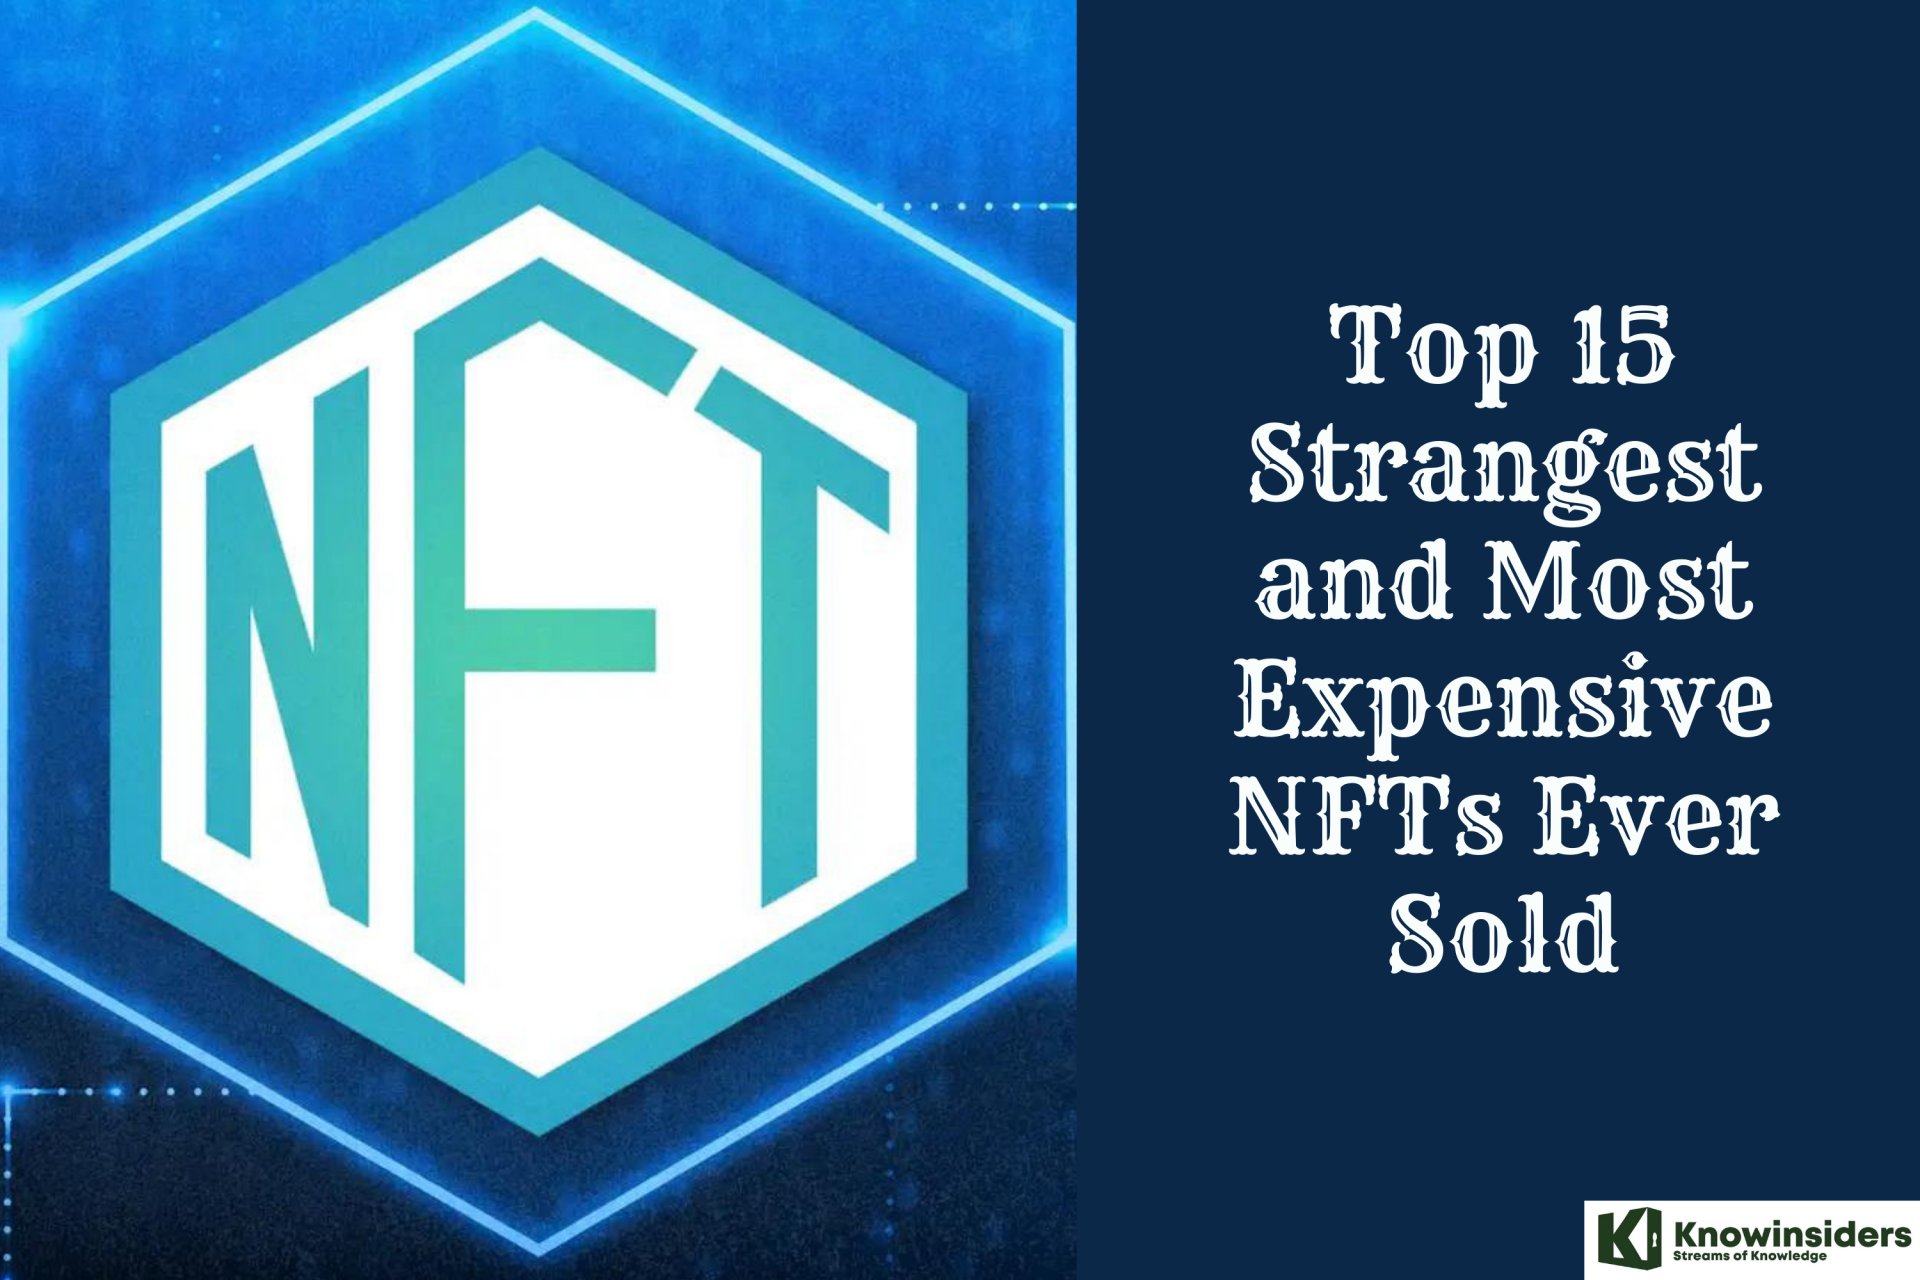 Top 15 Strangest and Most Expensive NFTs Ever Sold